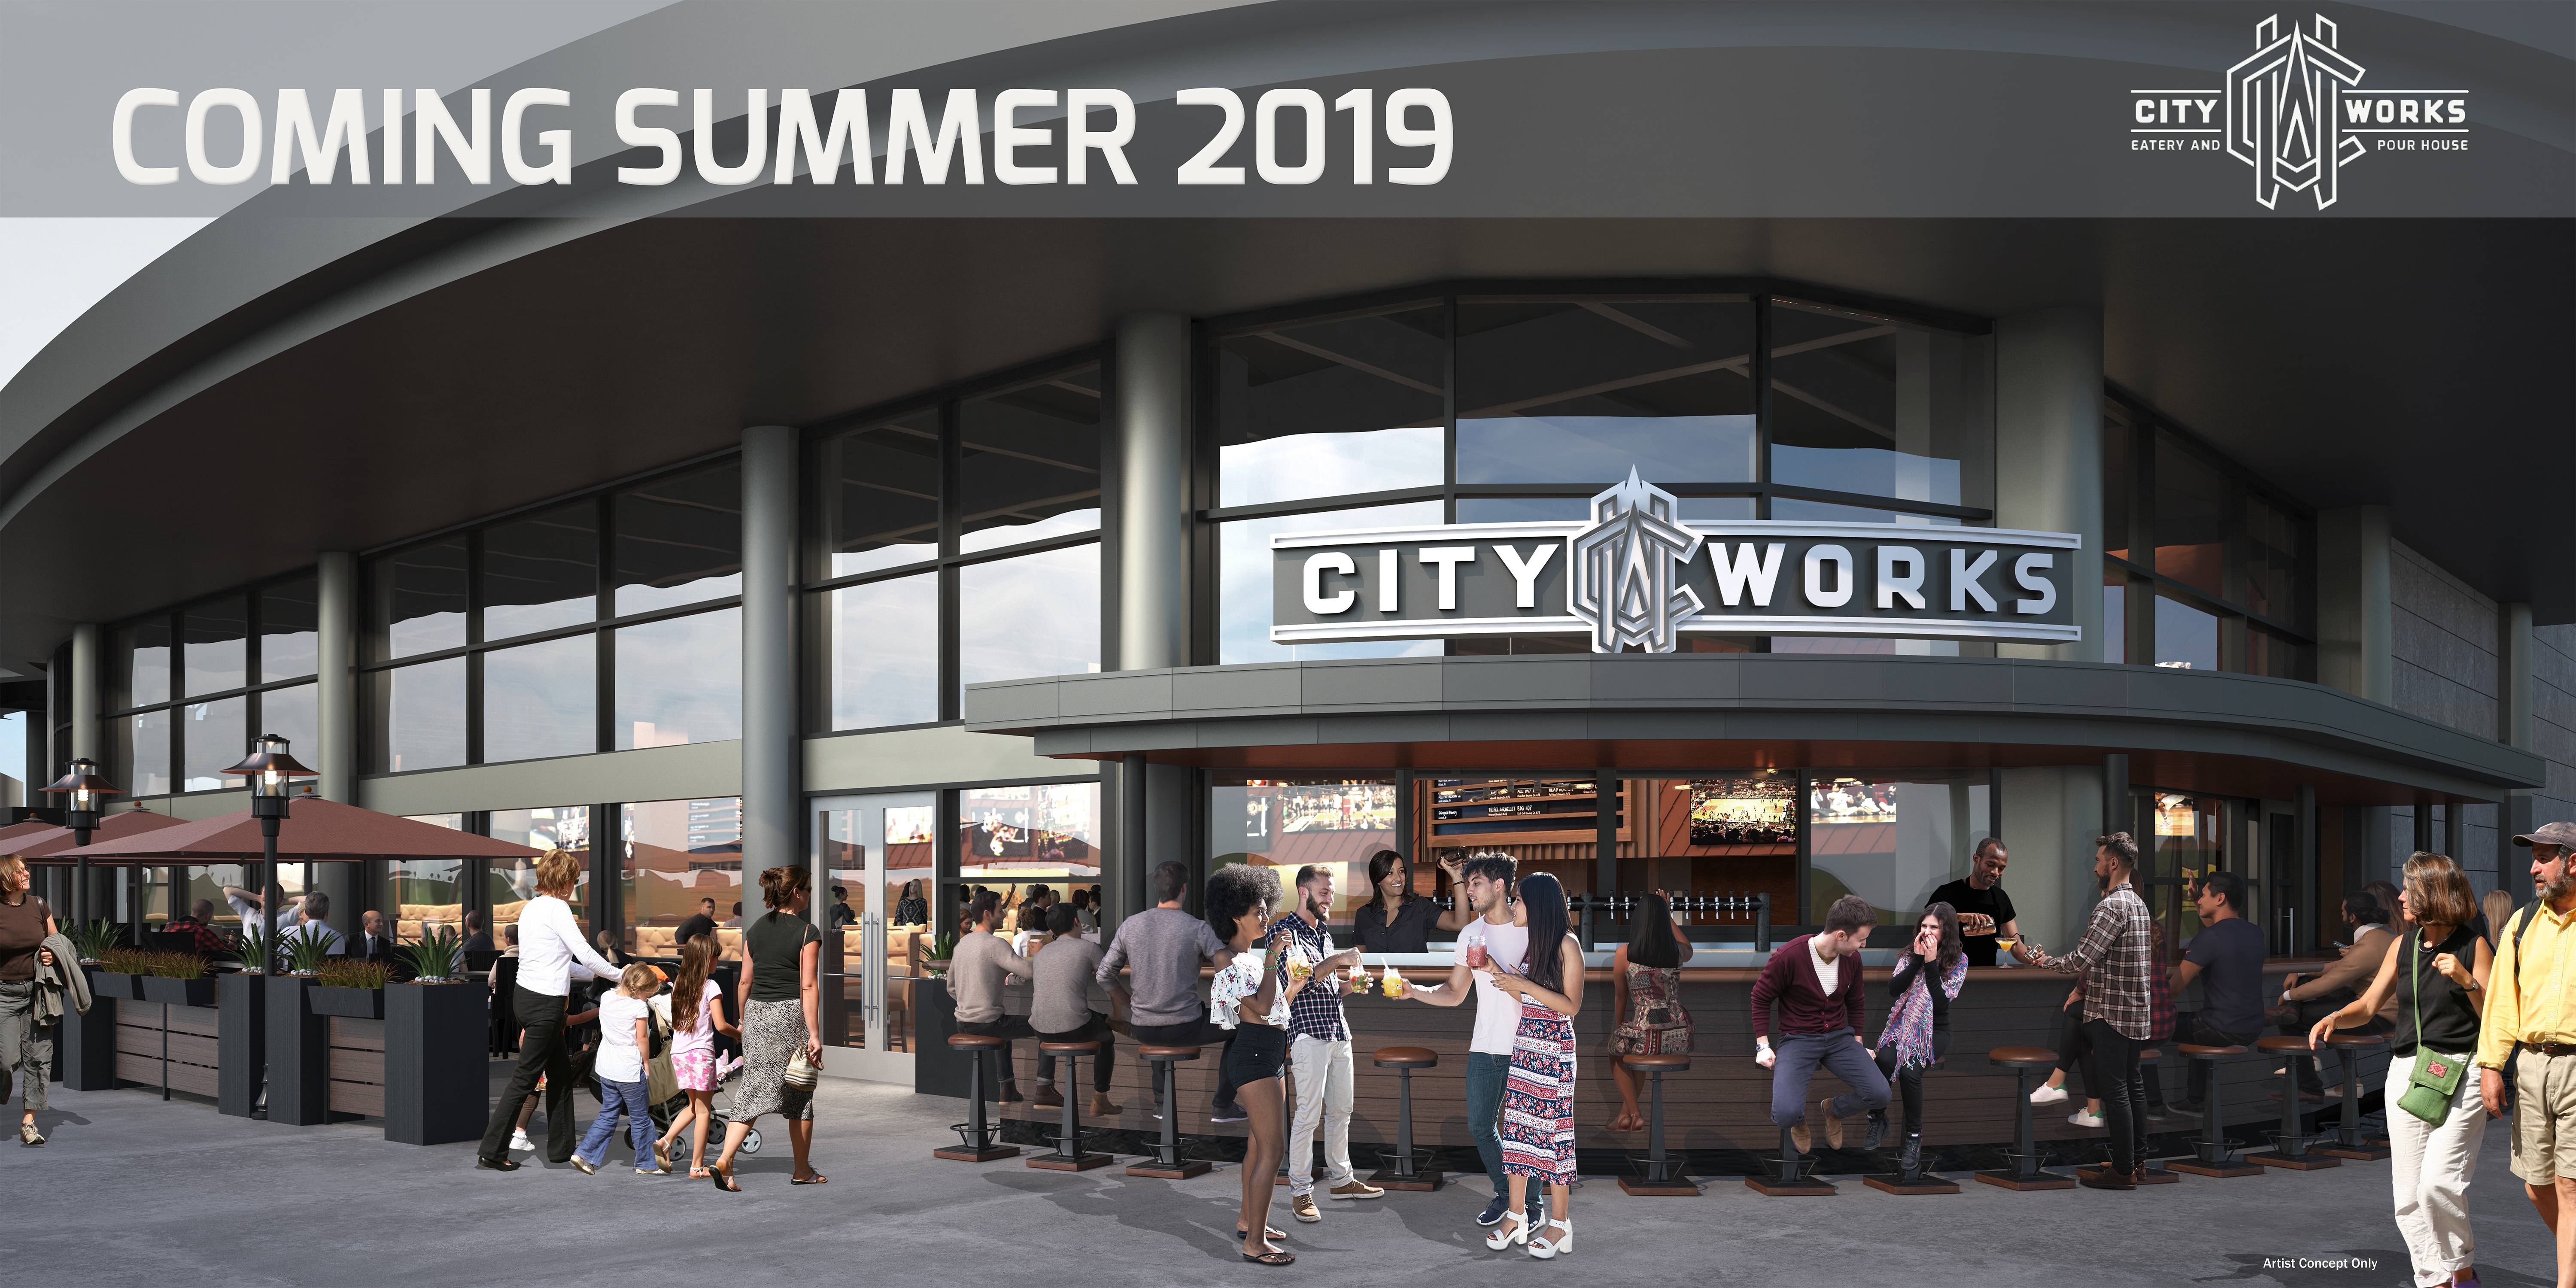 City Works Eatery and Pour House coming to Disney Springs in 2019